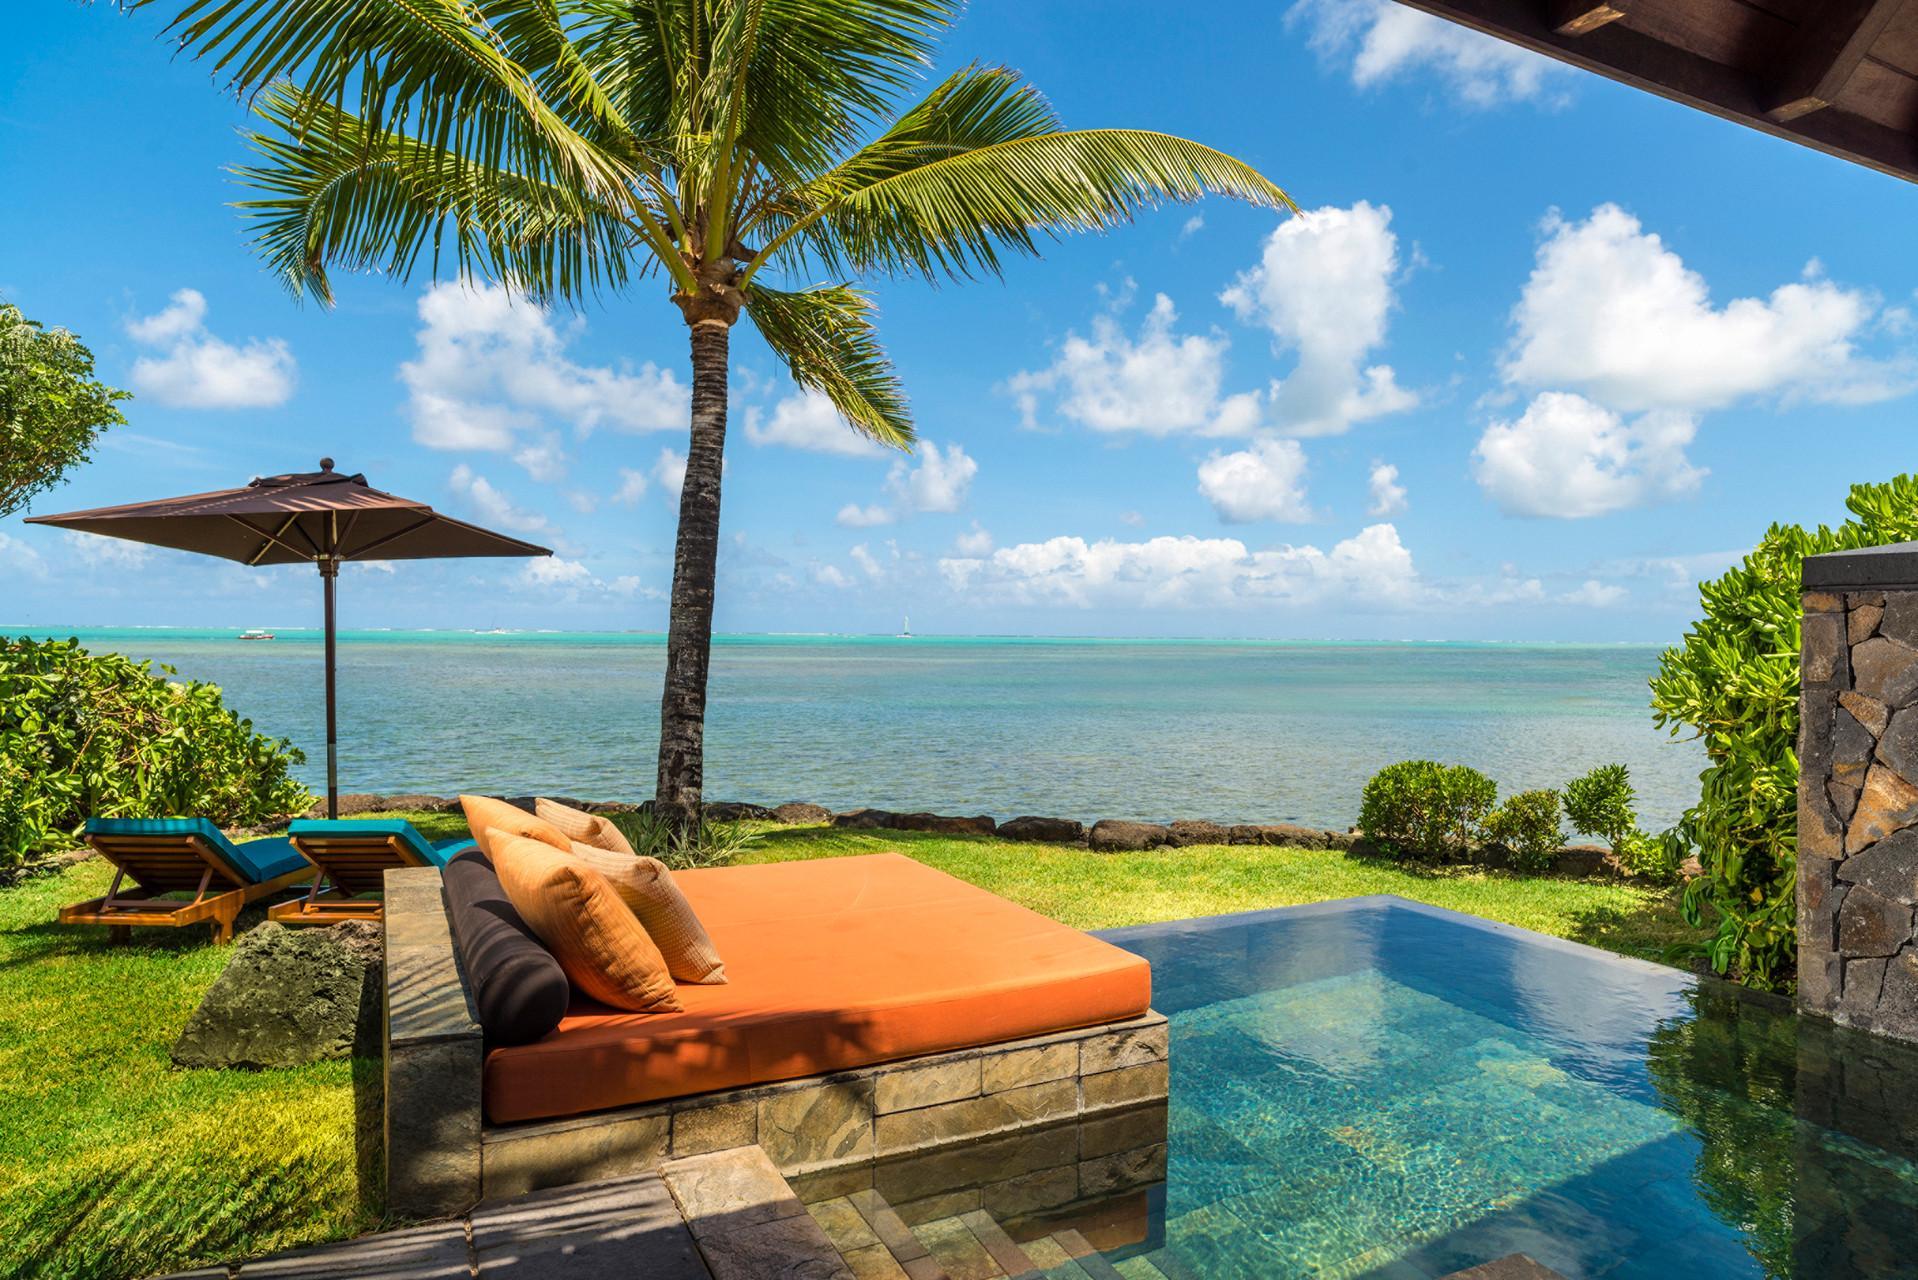 Wish you were here? The Four Seasons in Mauritius is offering savings of £699 per person in November